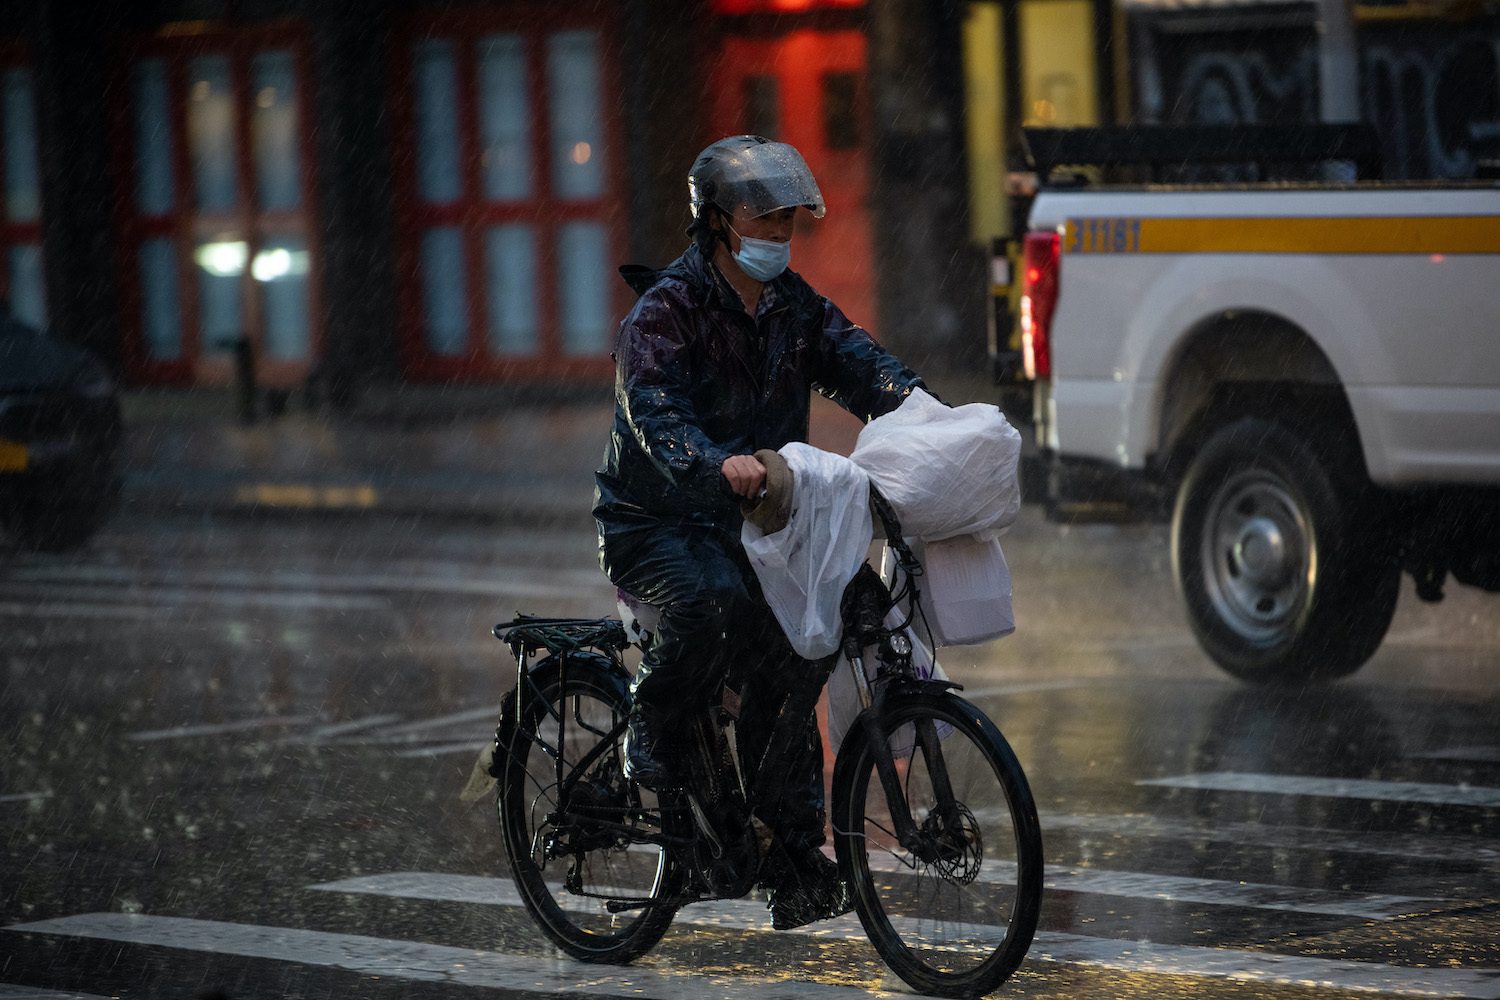 A delivery driver rides a bicycle through the rain on March 24, 2021 in New York City. OCTOBER 2021